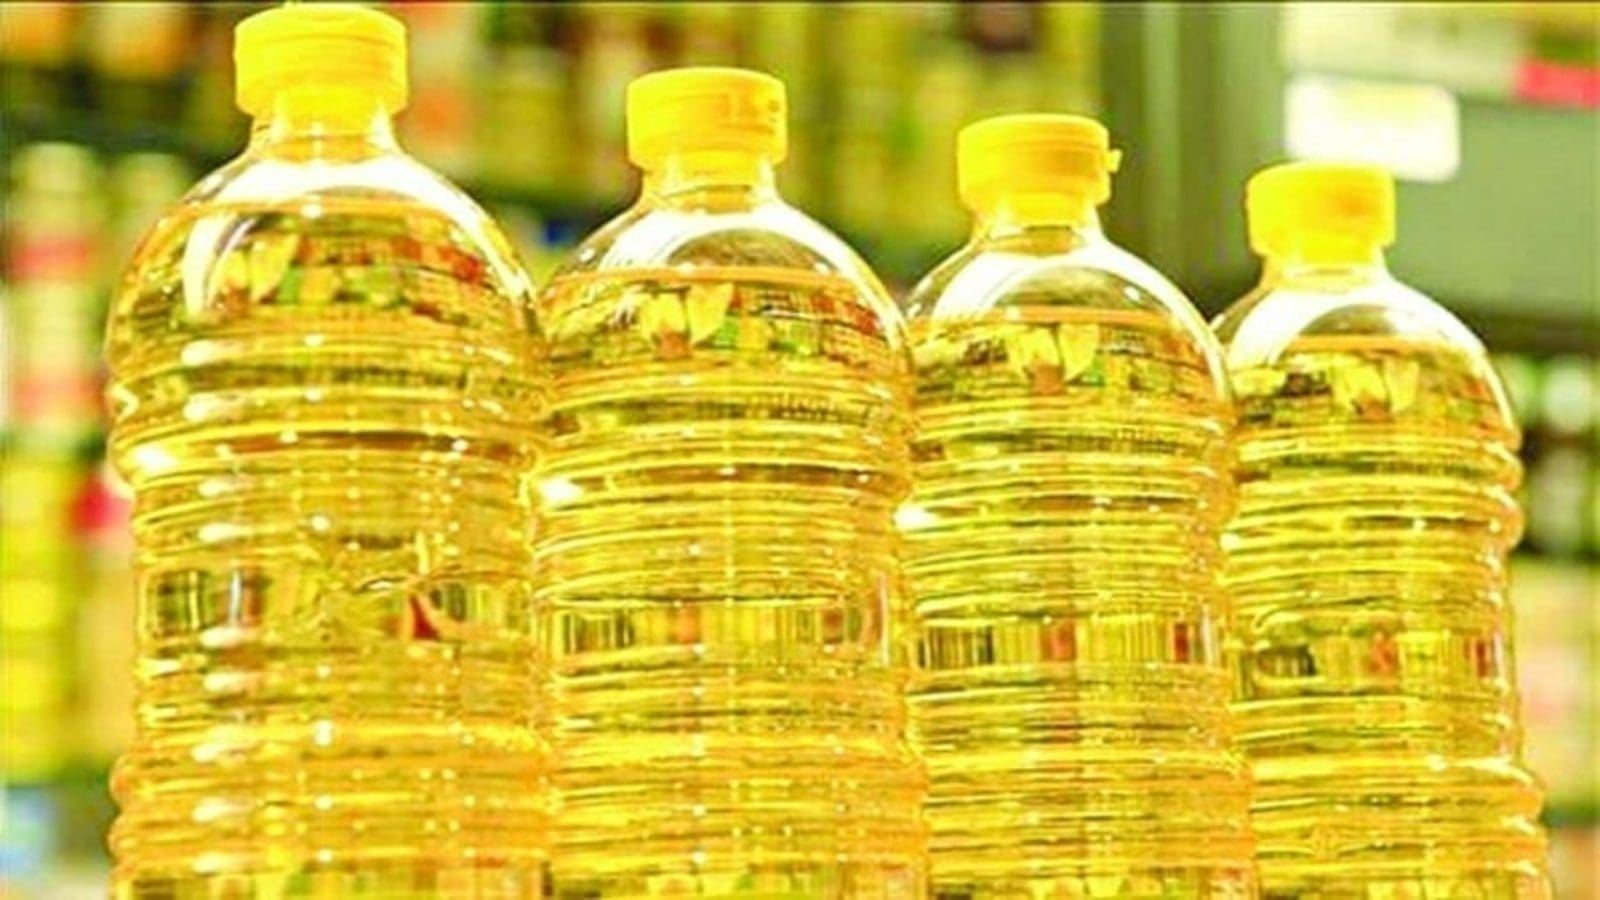 Tanzanian MPs protest over state’s plan to scrap tariffs on imported crude palm oil